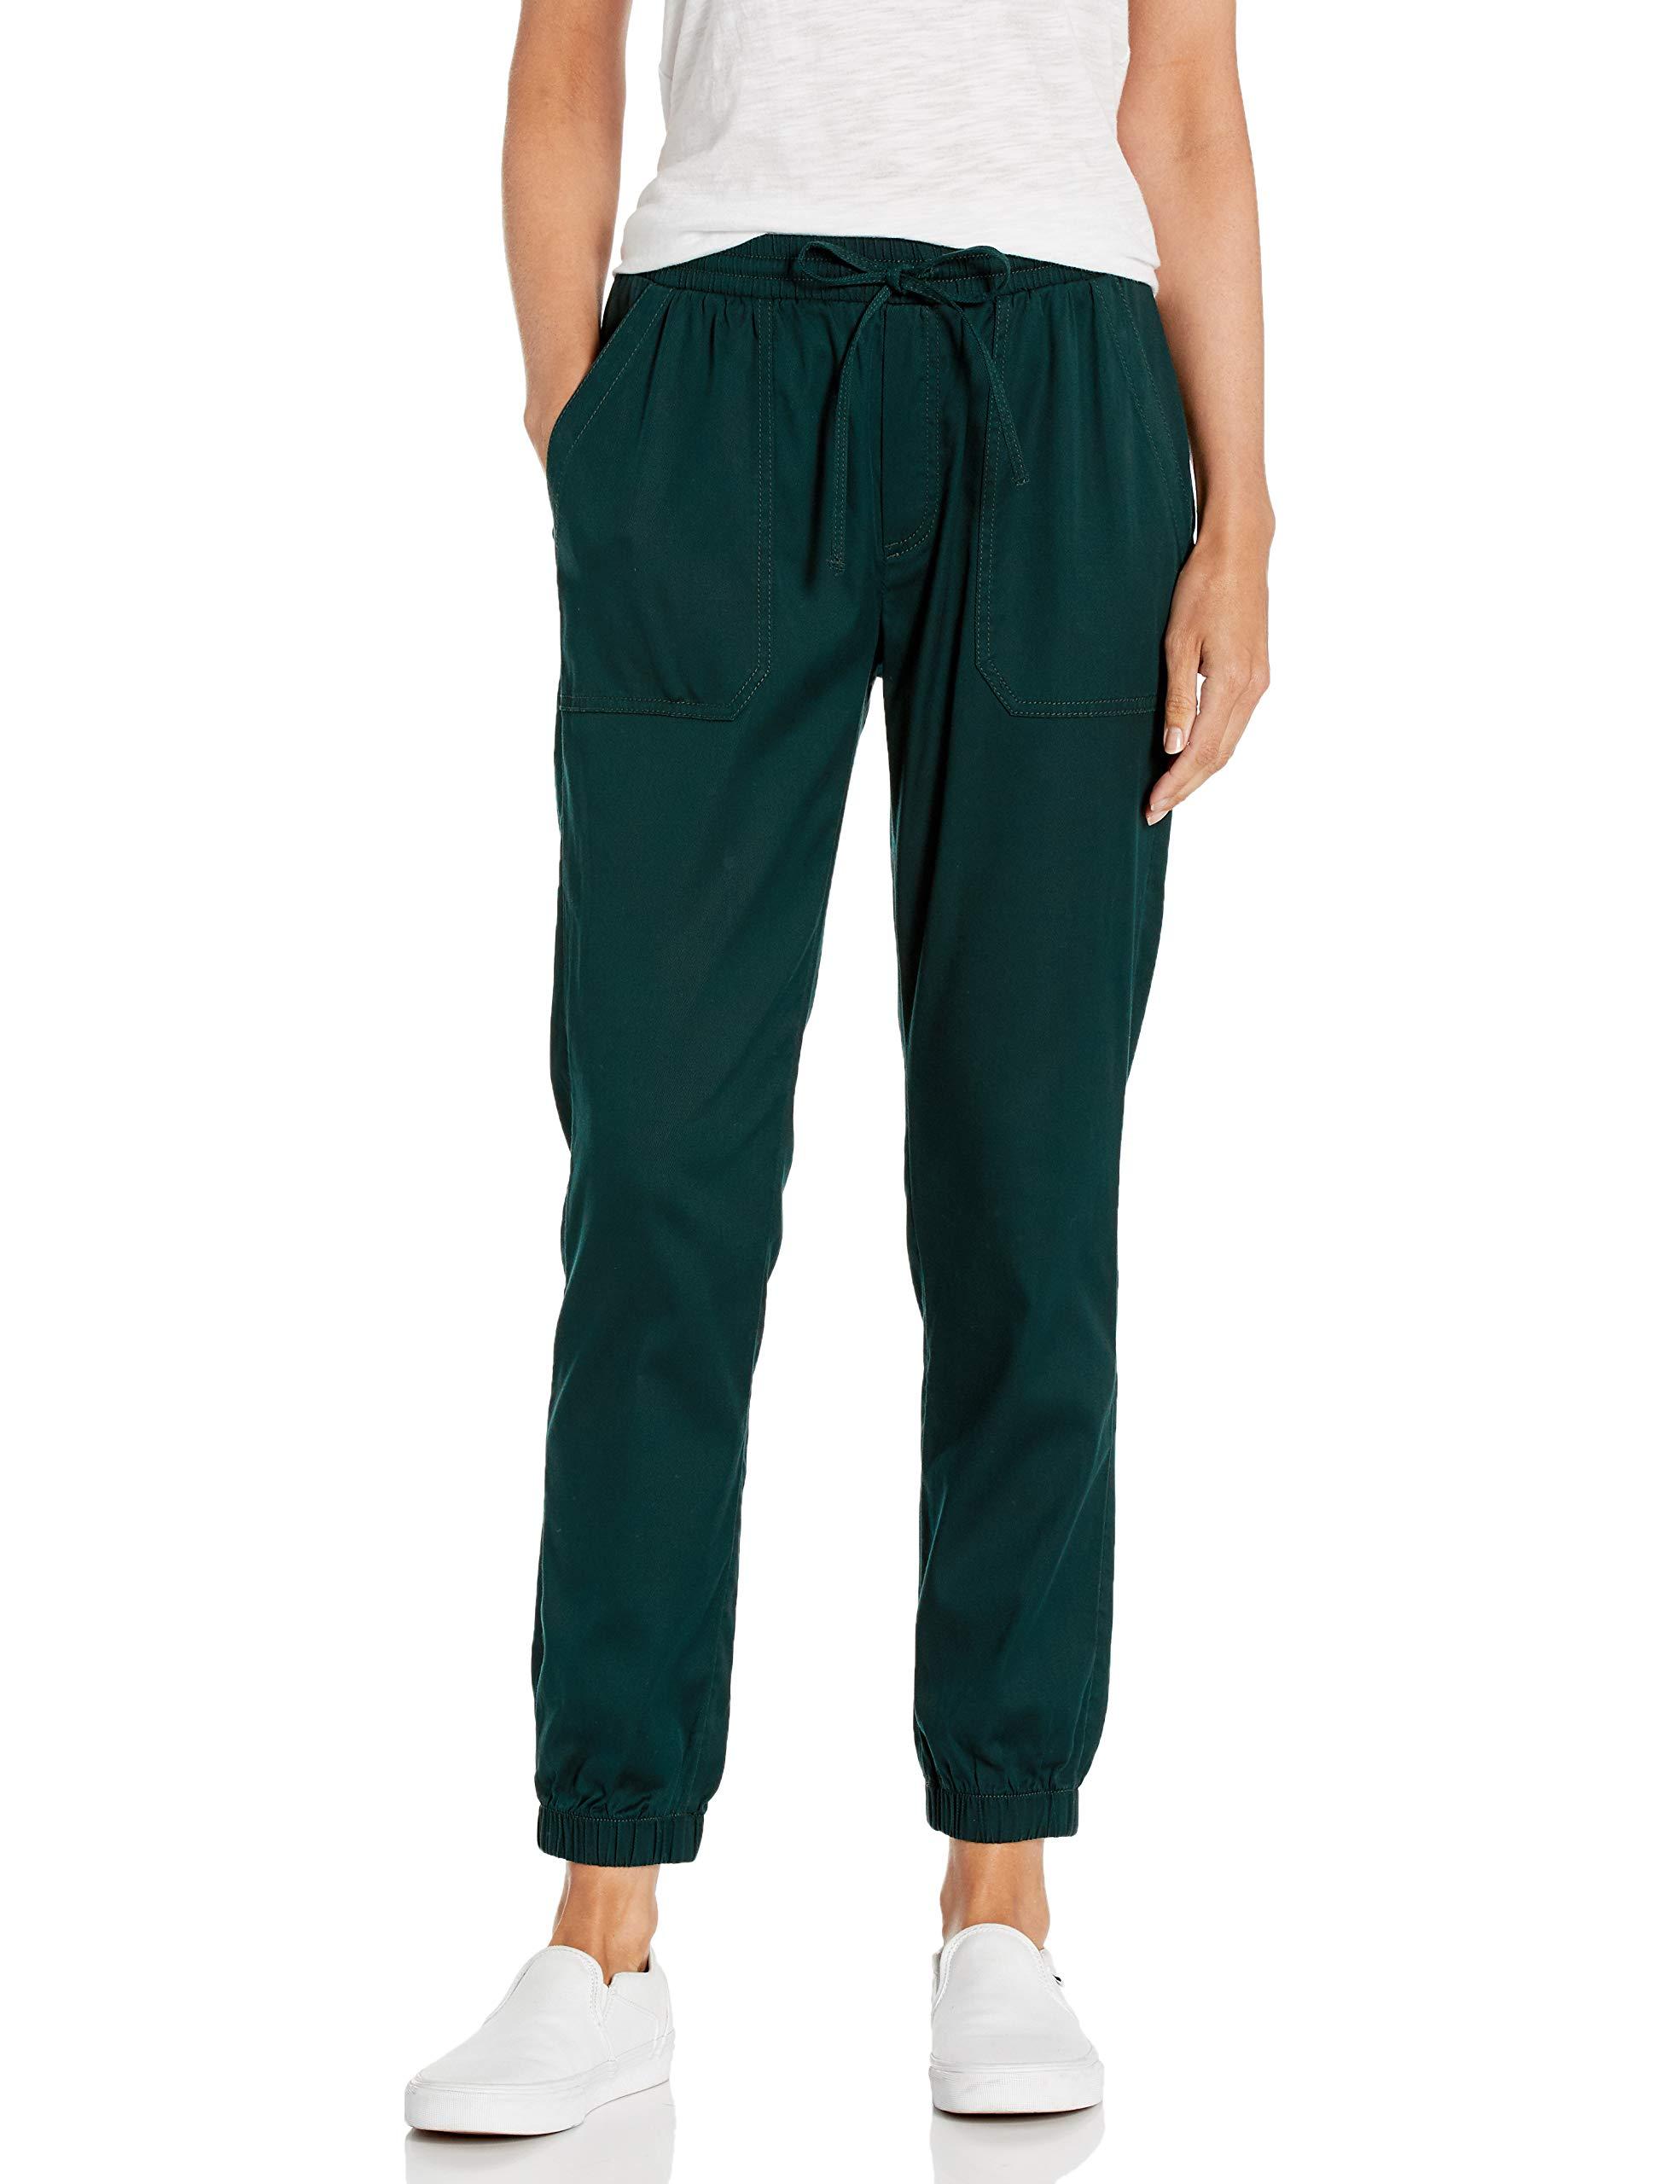 Daily Ritual Stretch Drawstring Jogger Pant in Moss Green (Green) - Lyst